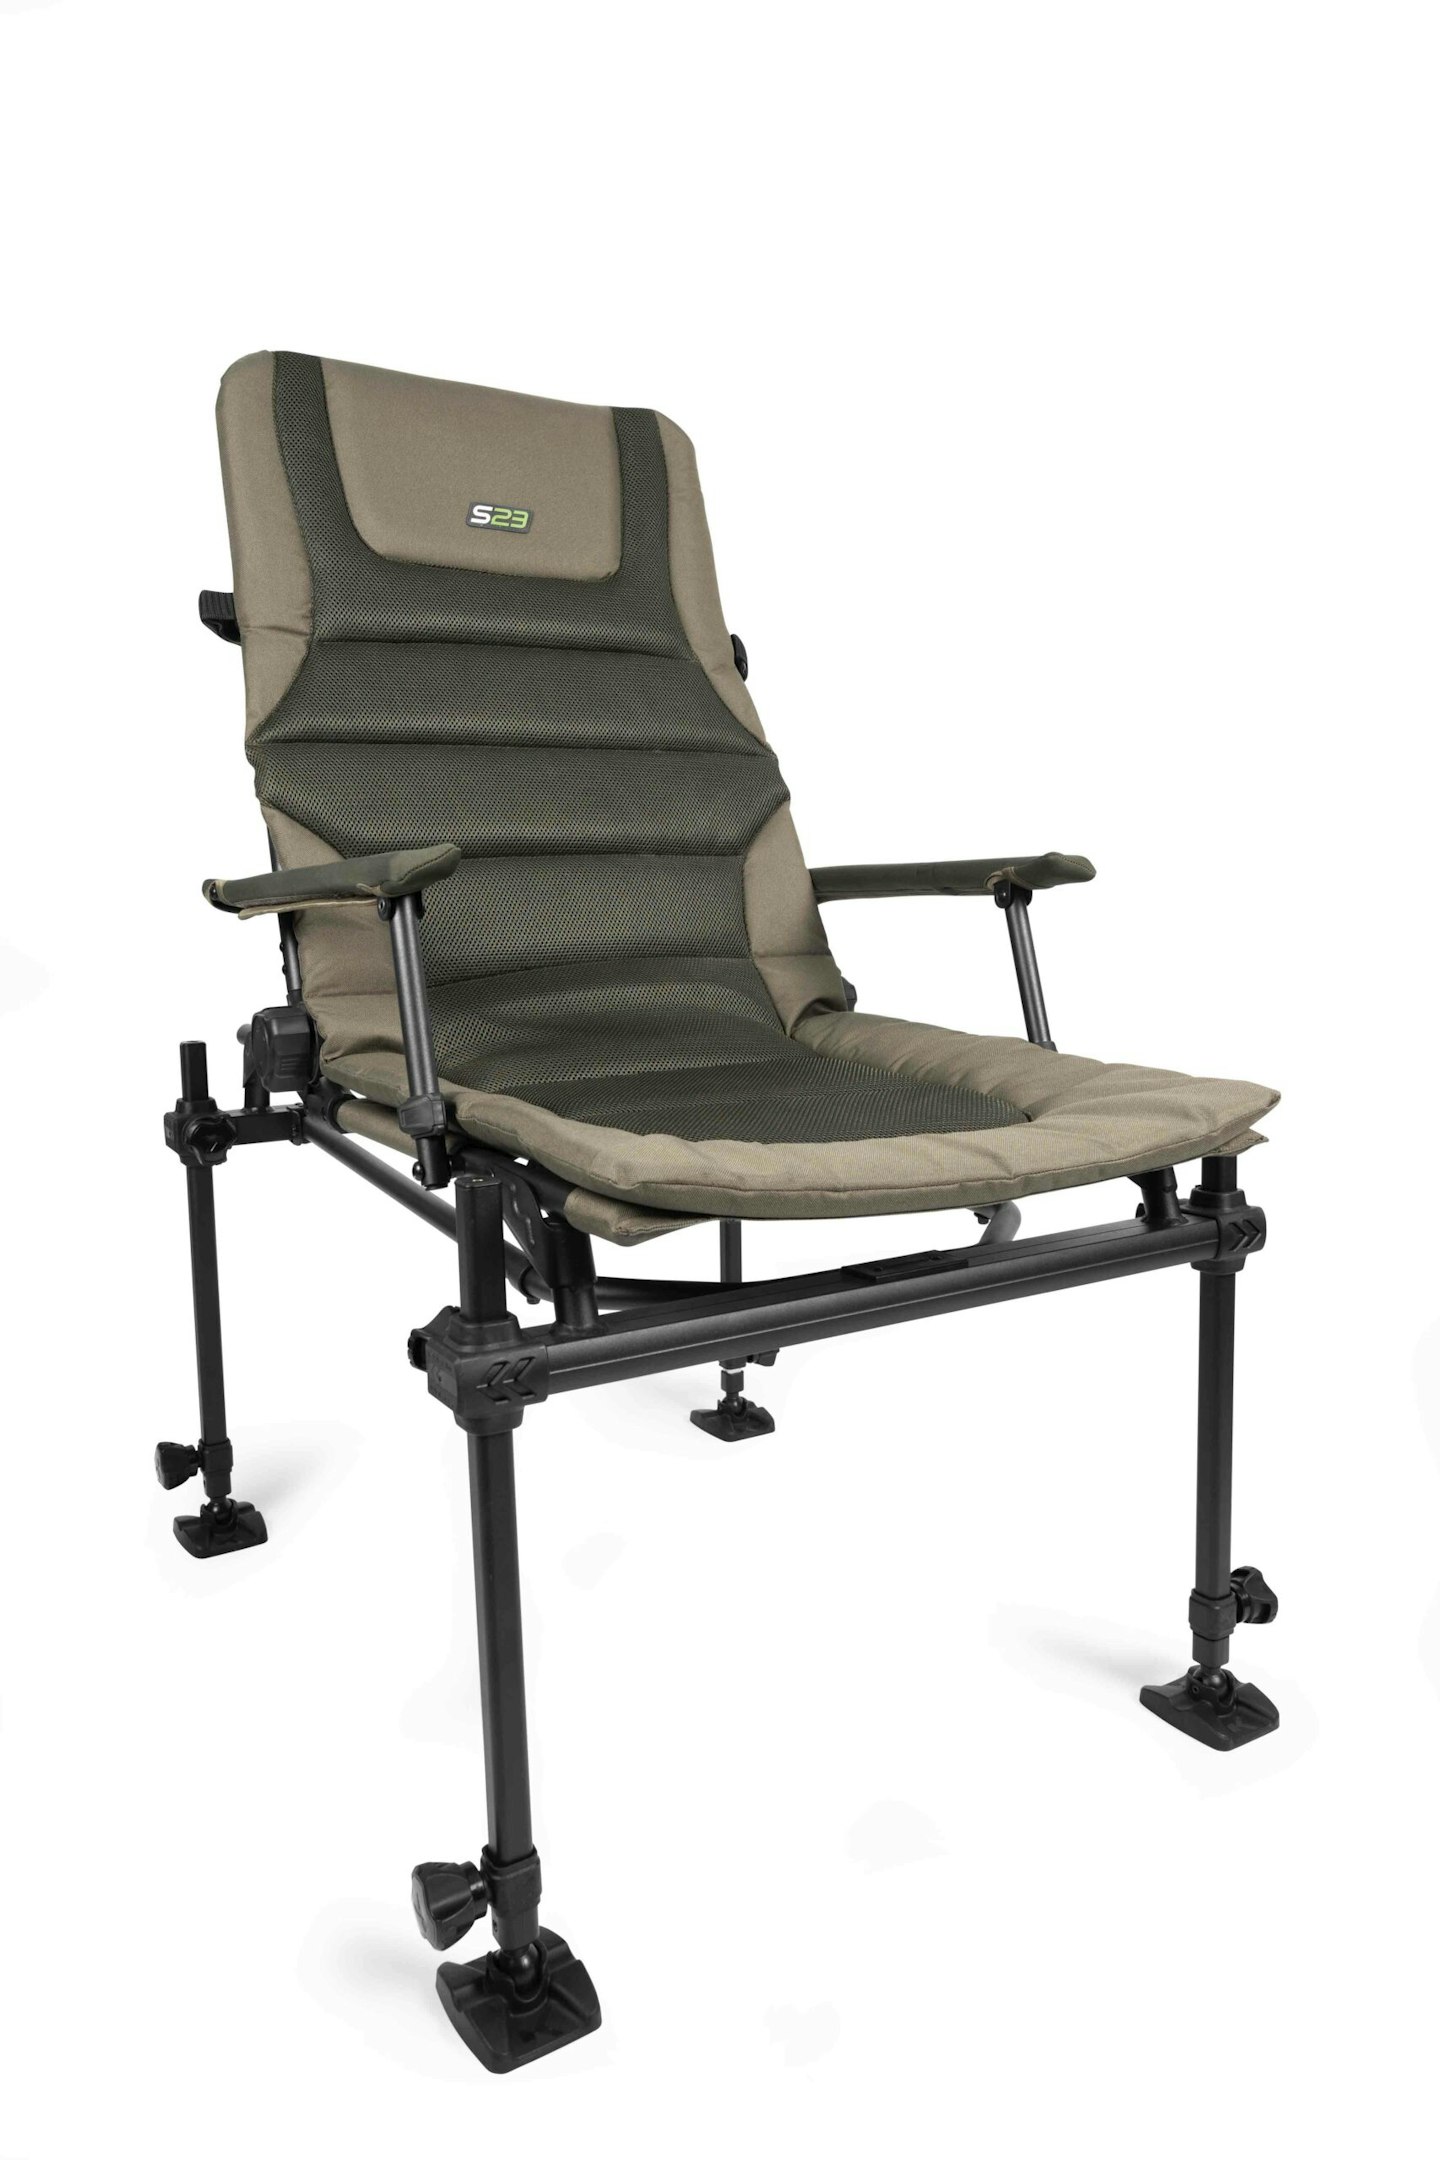 https://images.bauerhosting.com/marketing/sites/2/2023/04/Korum-s23-Accessory-Chair-S23-Deluxe_st_01-scaled.jpg?auto=format&w=1440&q=80